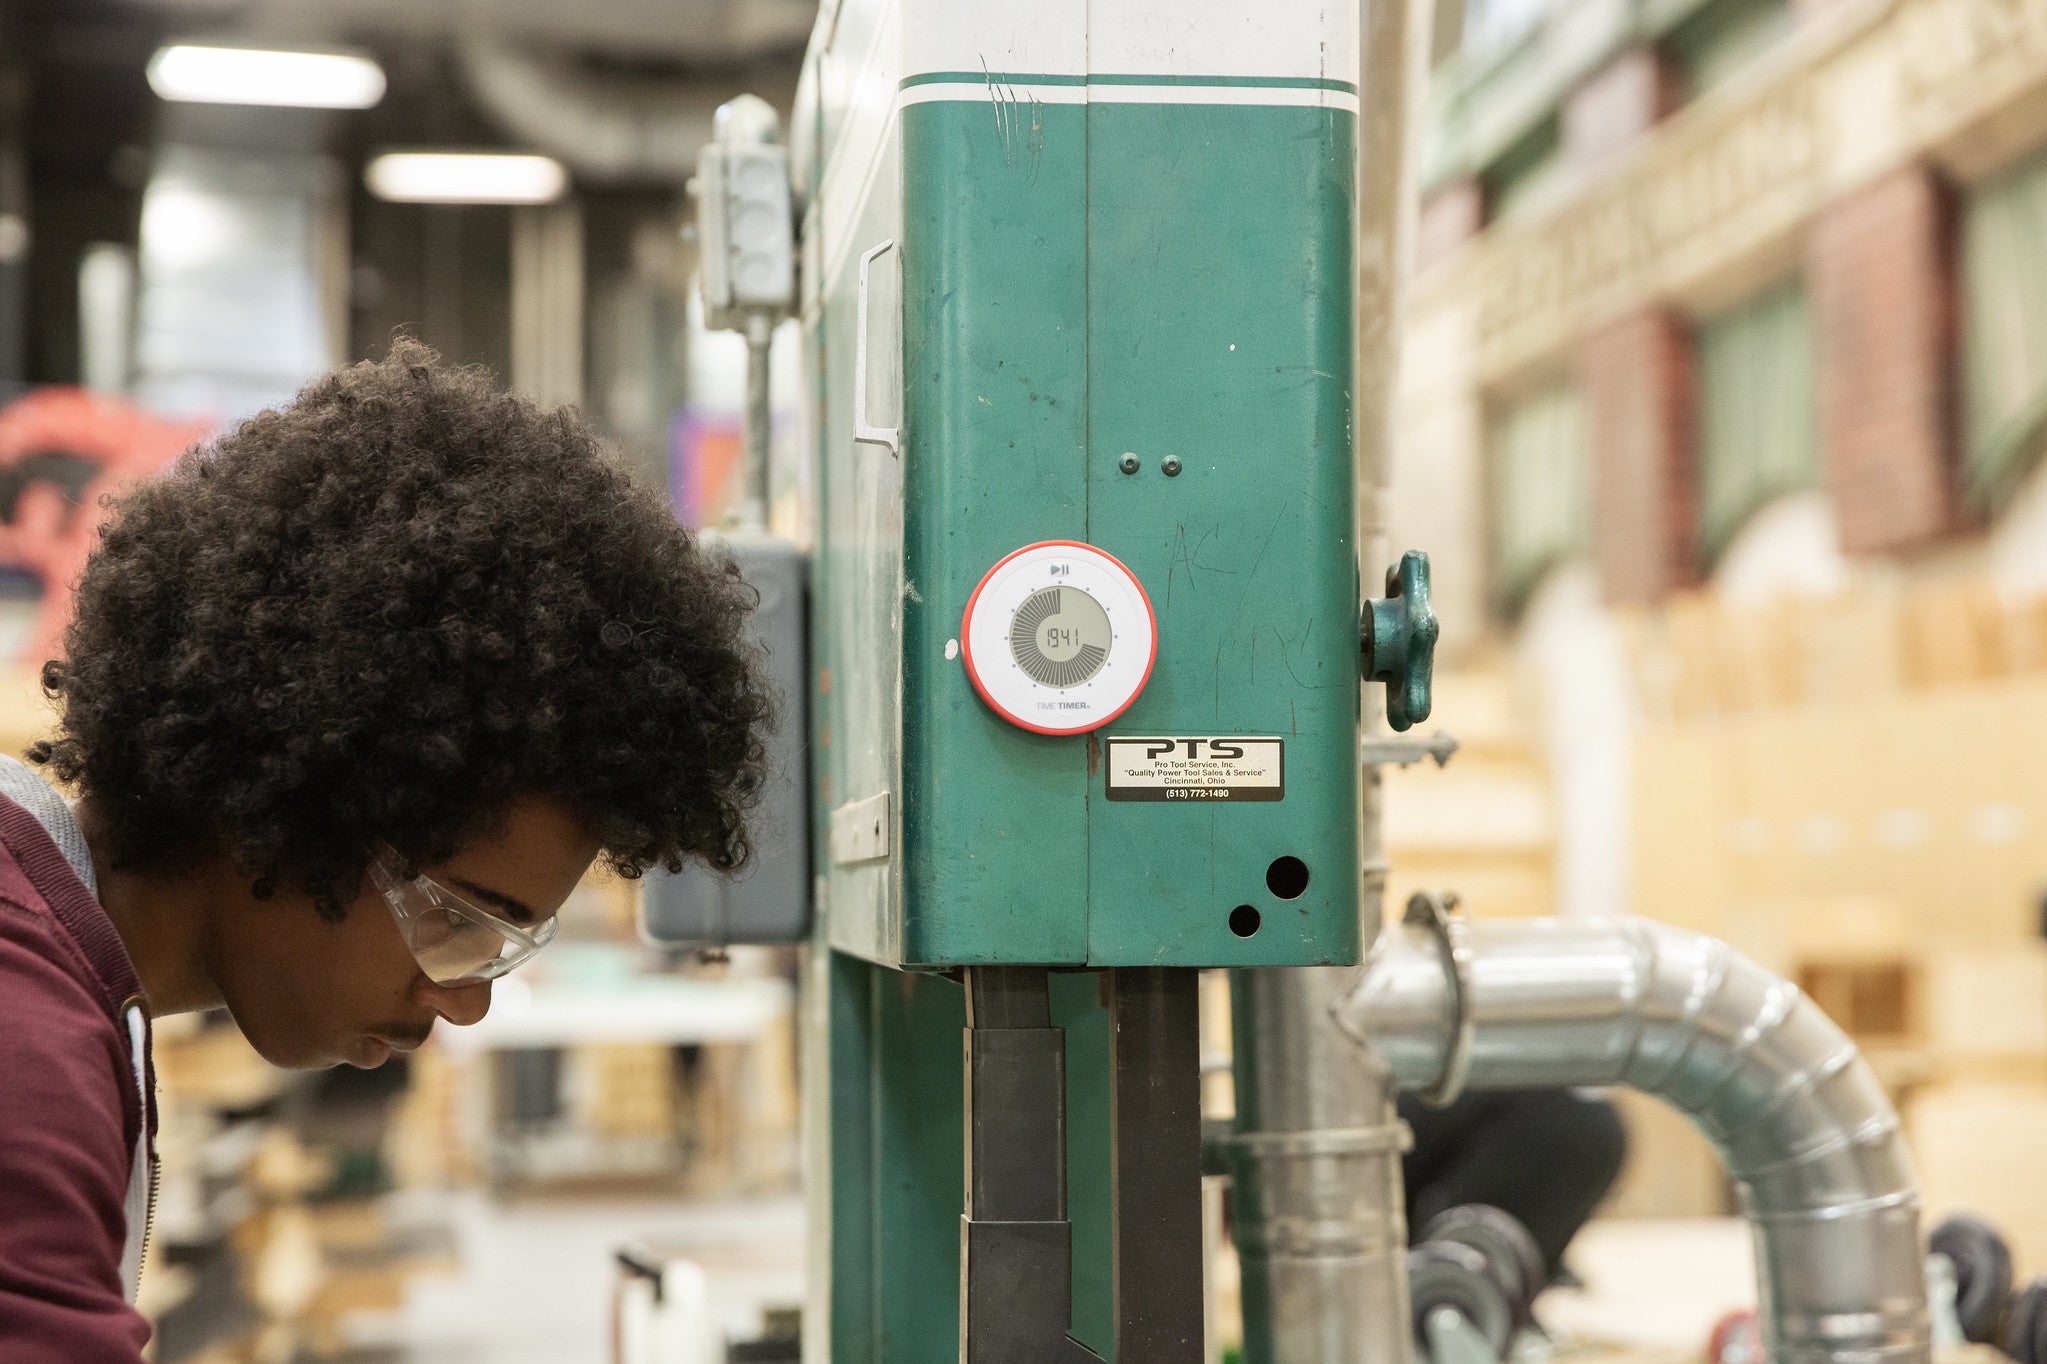 A Time Timer Twist is fixed to a metal box in a shop-like environment. A person with a dark skin tone and a black afro is wearing safety goggles and performing a task out of frame right next to the box.